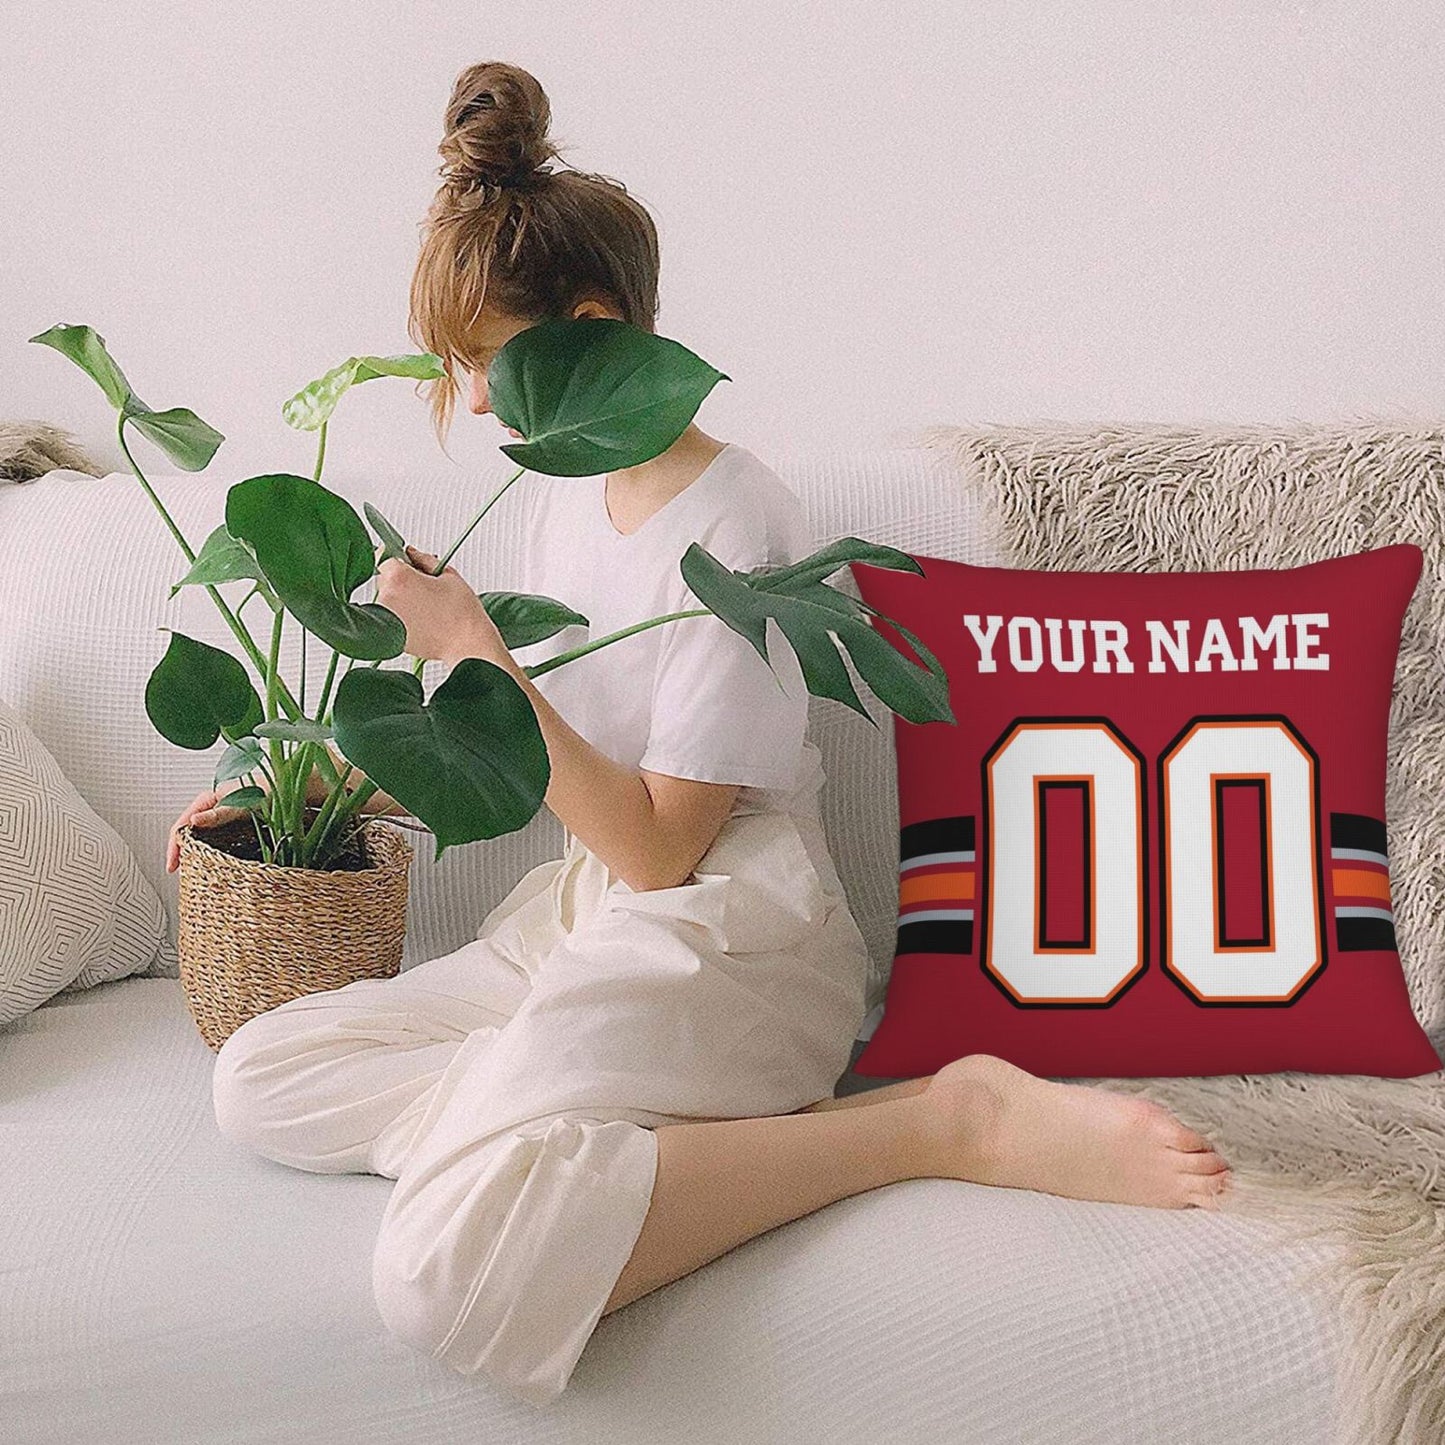 Custom Red Tampa Bay Buccaneers Decorative Throw Pillow Case - Print Personalized Football Team Fans Name & Number Birthday Gift